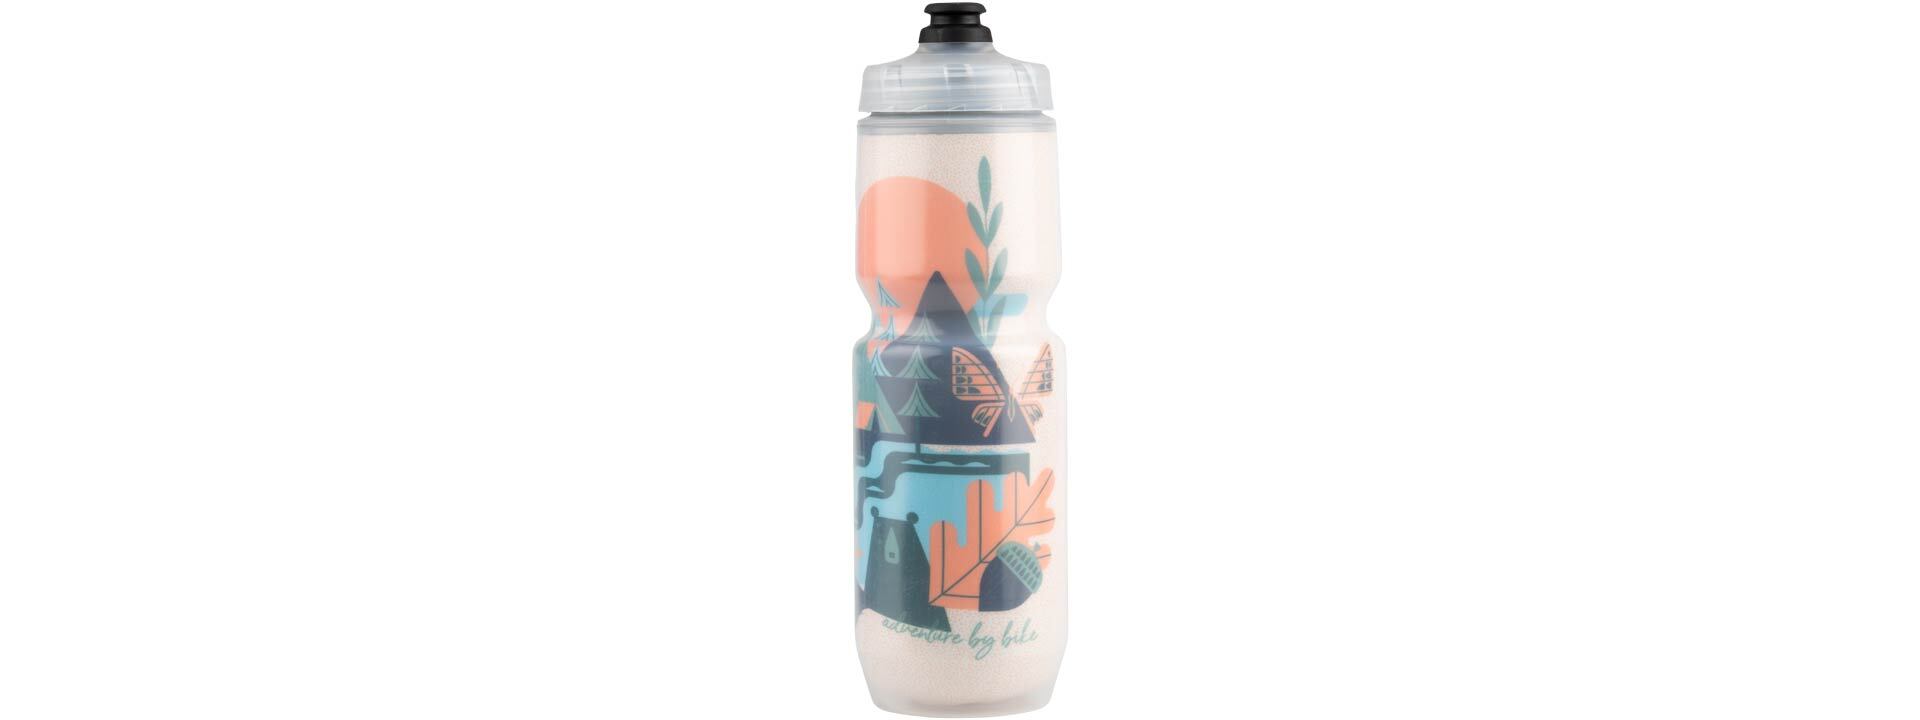 https://www.salsacycles.com/assets/salsa-meander-purist-insulated-water-bottle-WB2913-01-1920x720.jpg